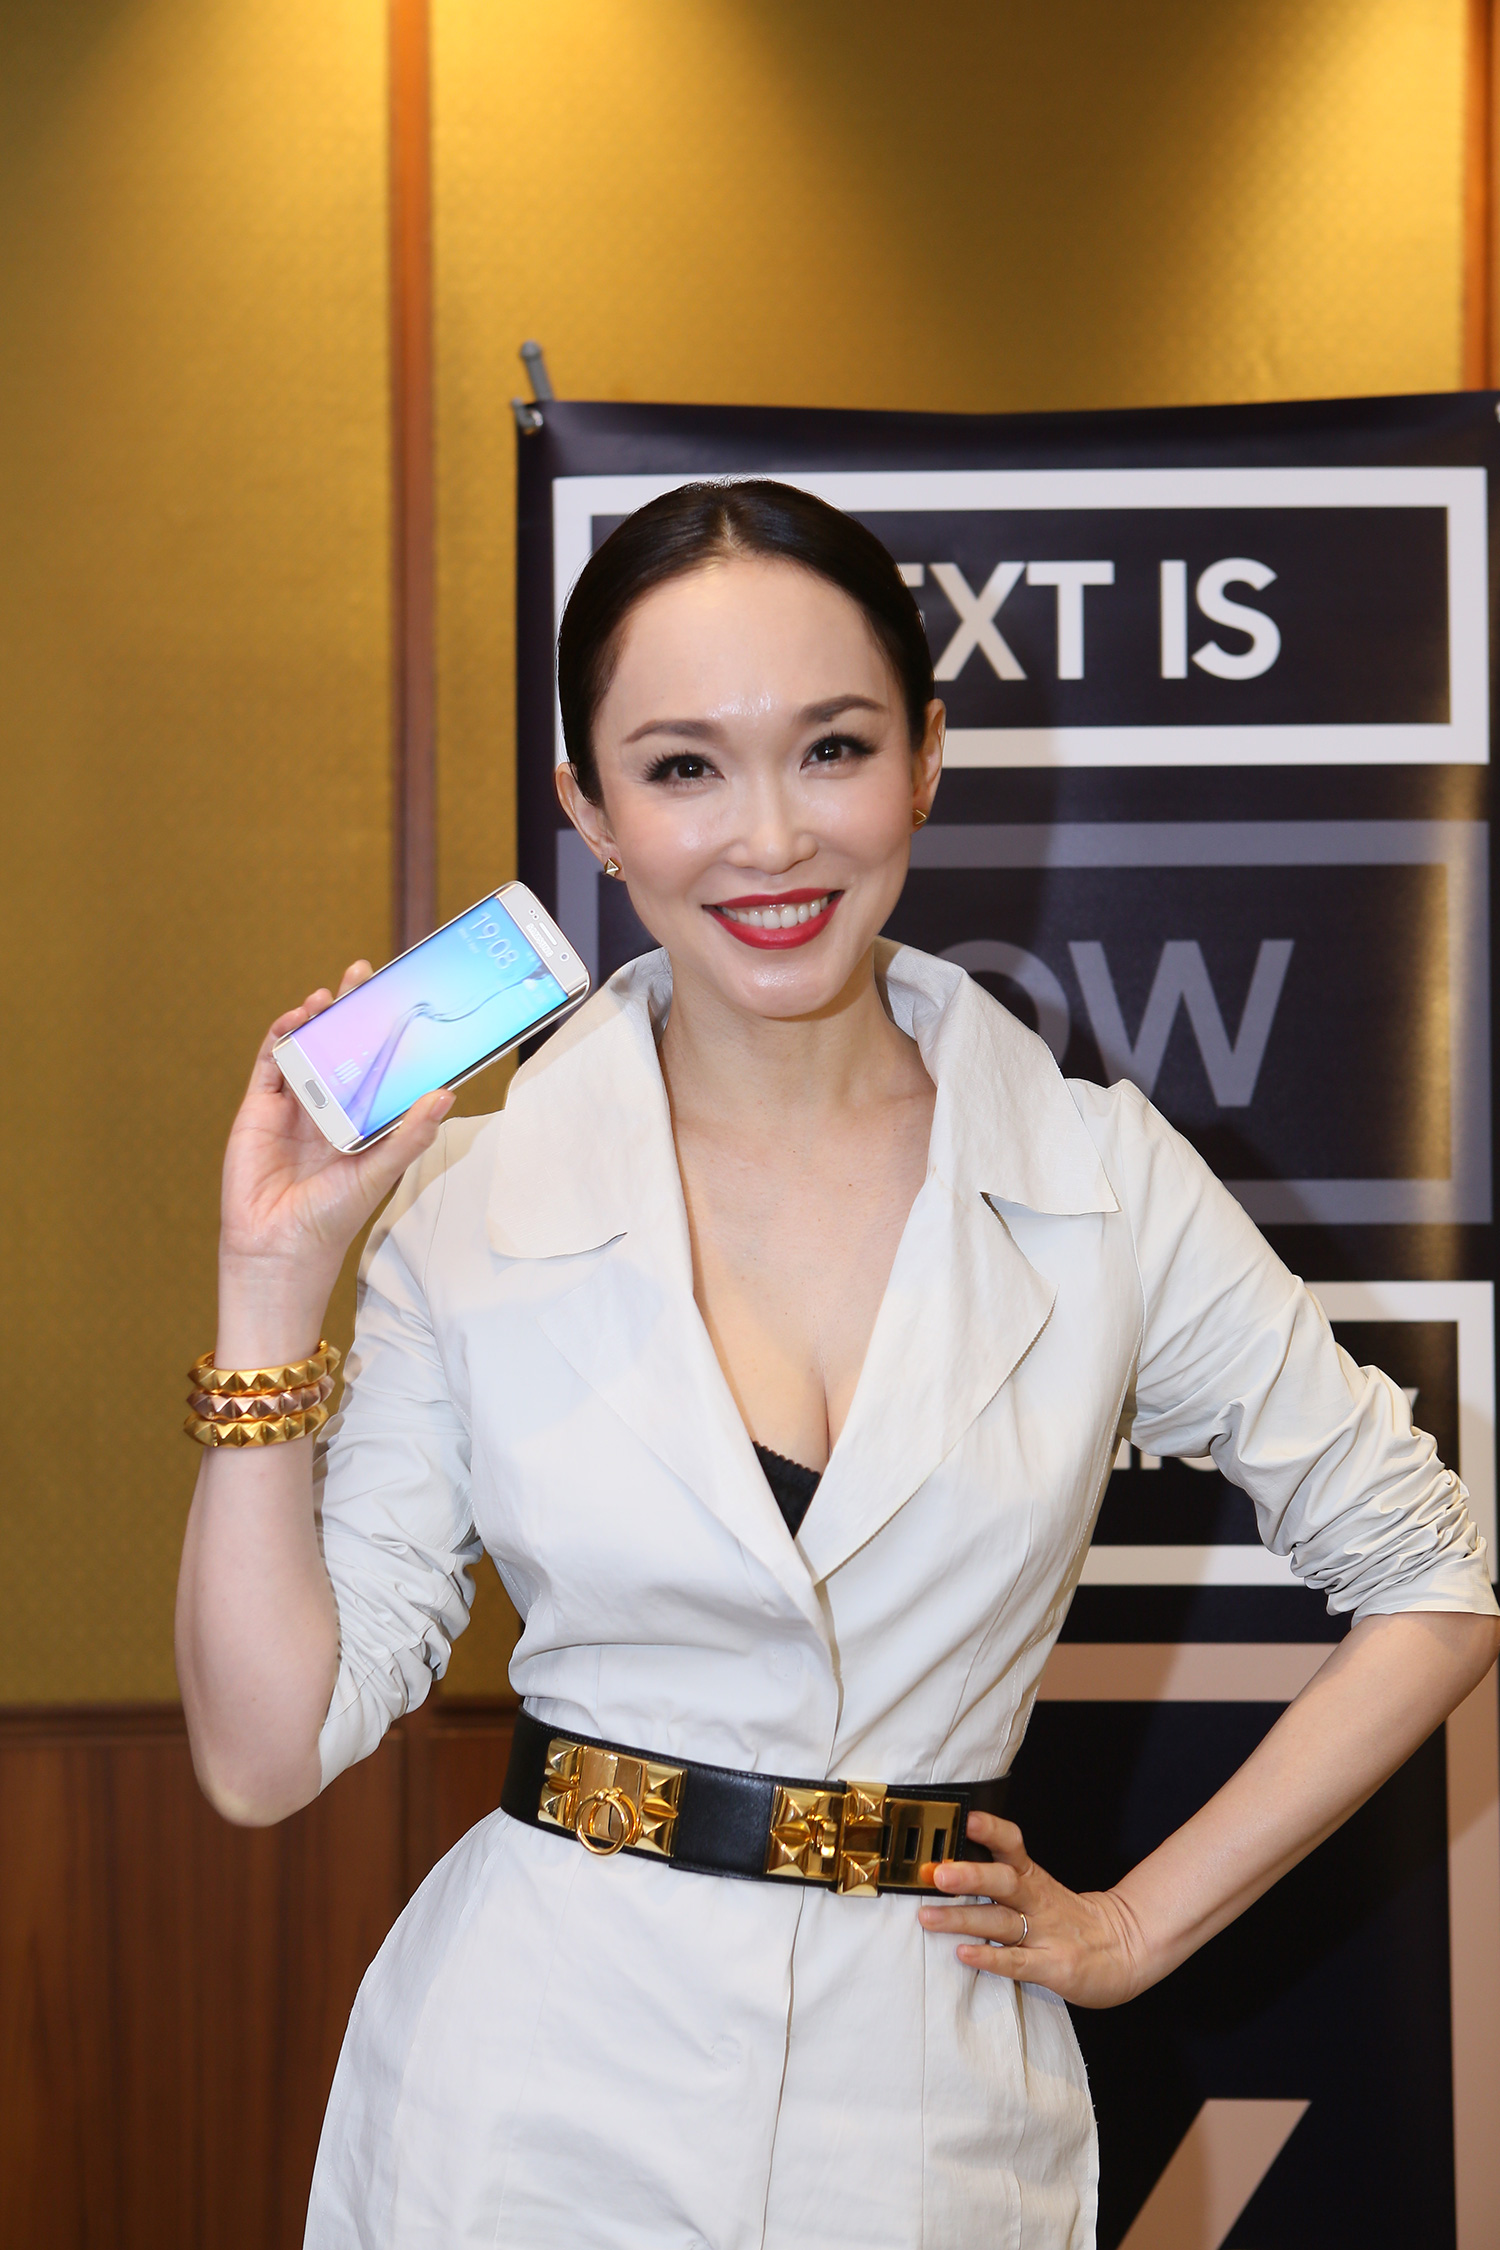 International-artiste-Fann-Wong-posing-with-the-latest-Galaxy-S6-edge-4G+-at-the-Samsung-Galaxy-S6-World-Tour-event